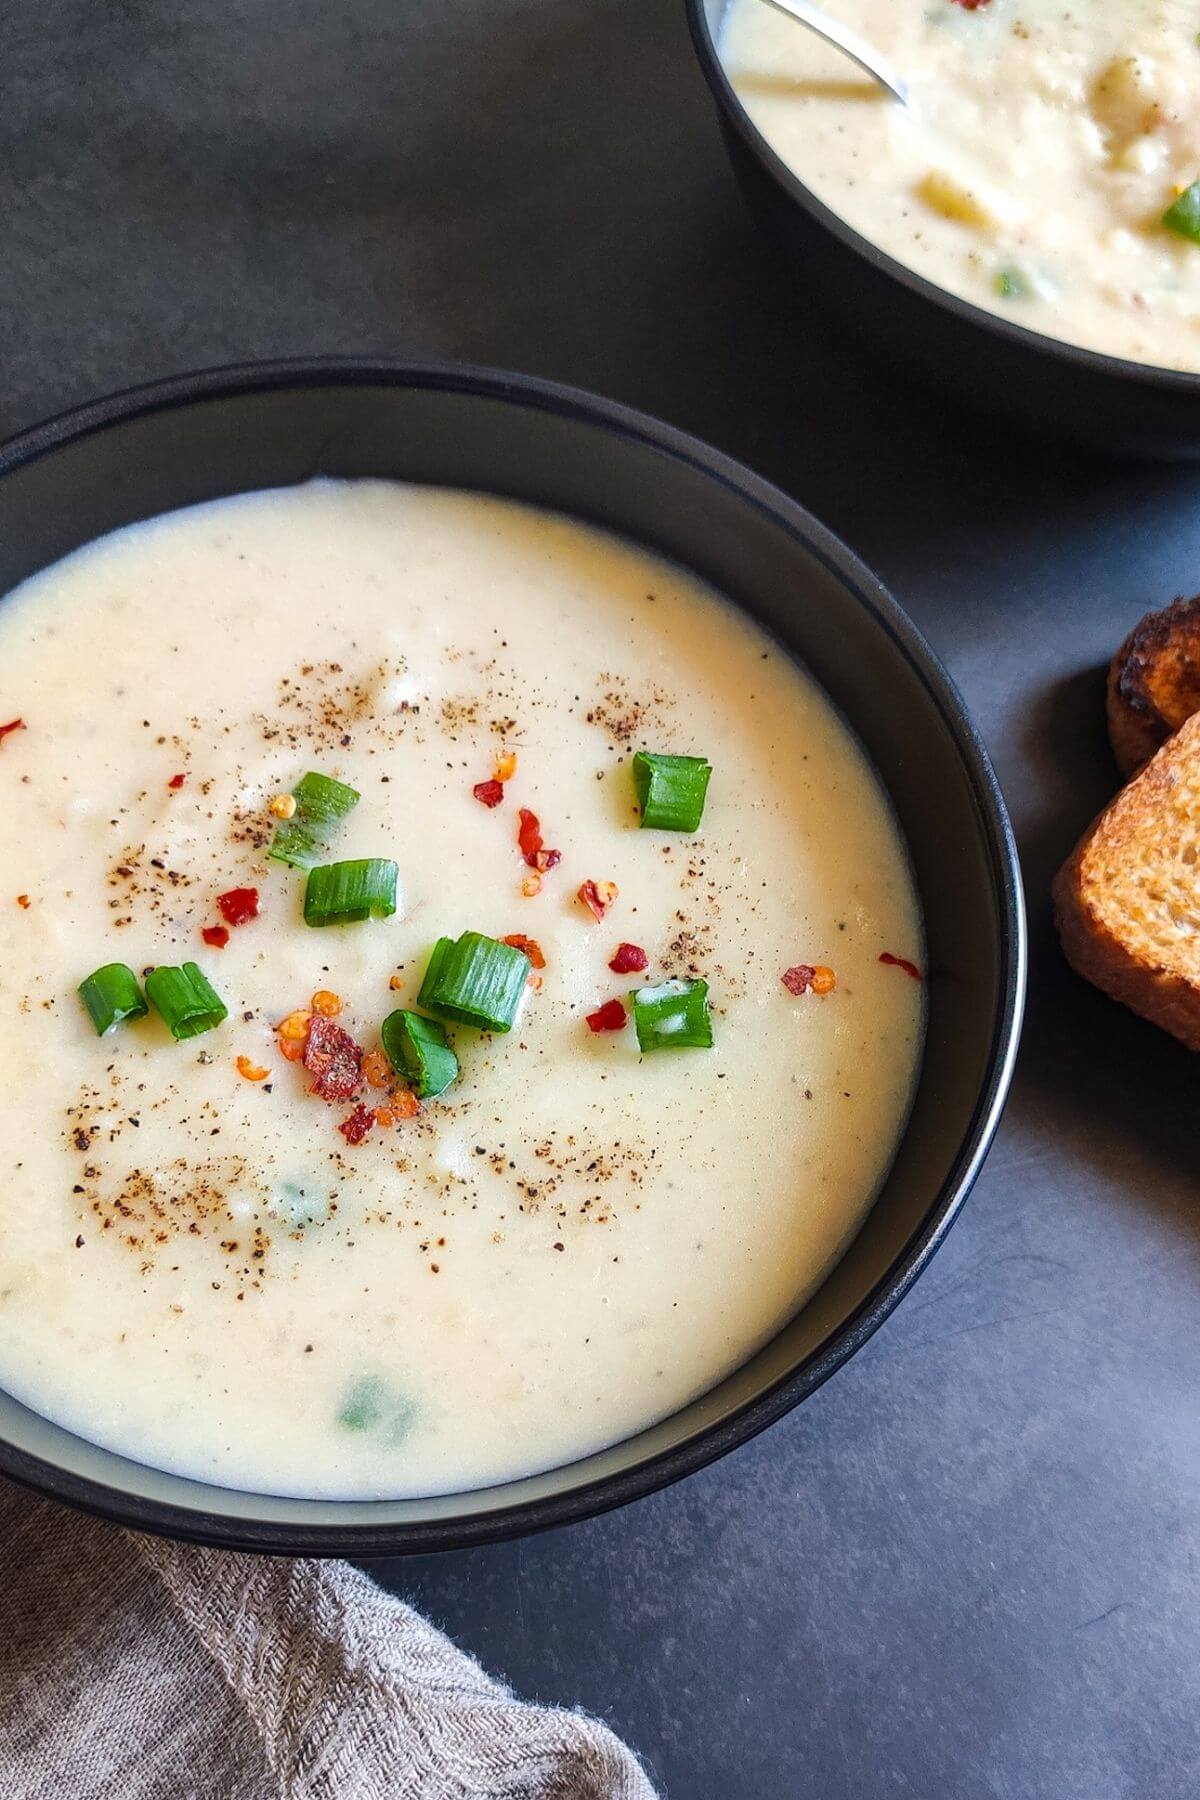 a bowl of potato soup garnished with spring onion greens and another bowl and toasts in the background.